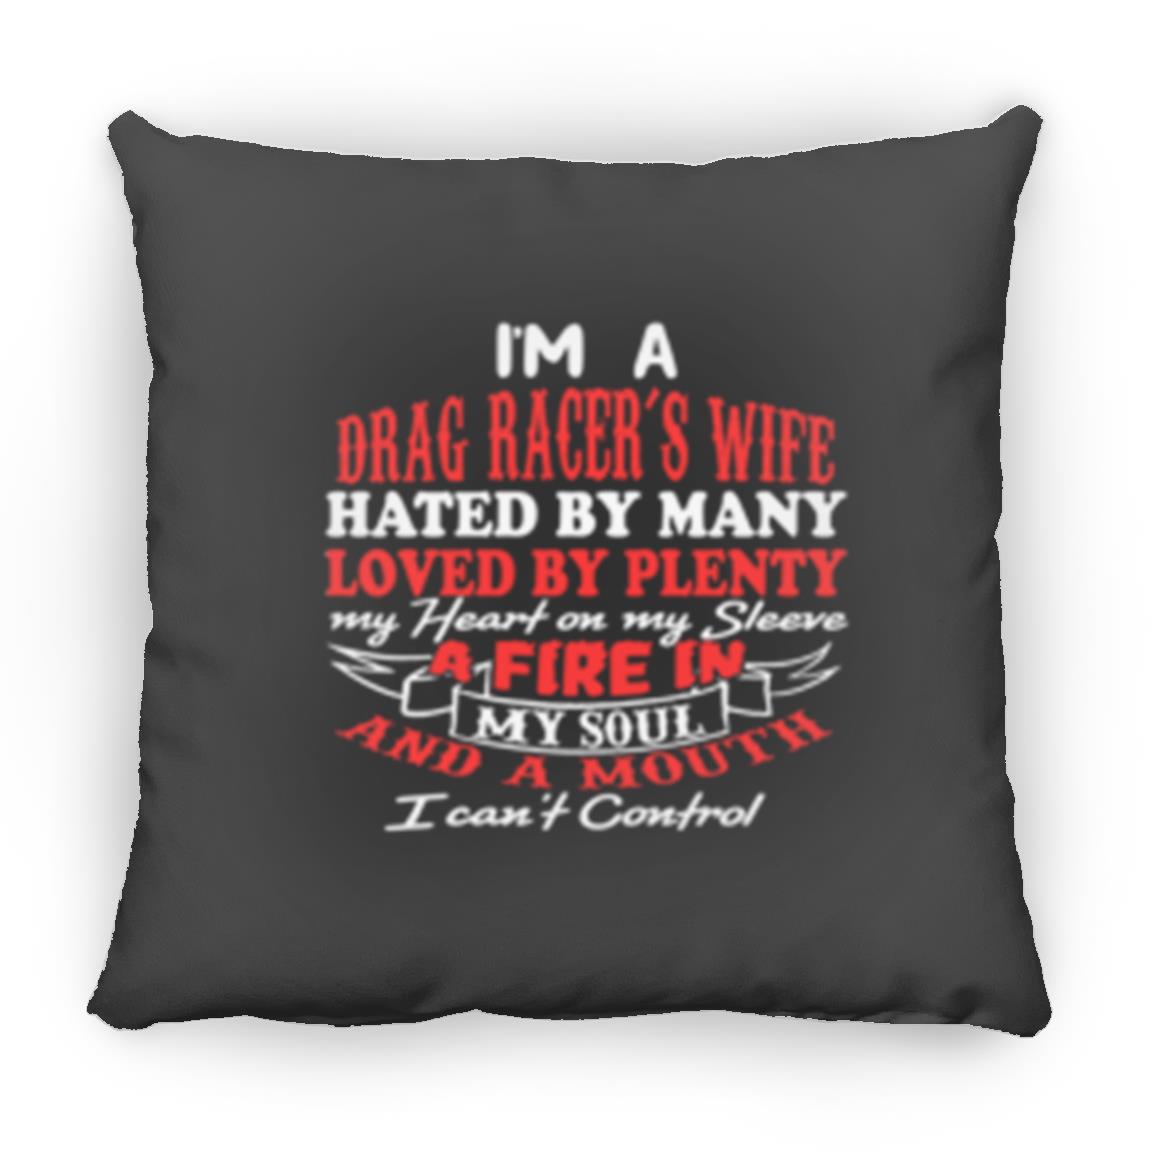 I'm A Drag Racer's Wife Hated By Many Loved By Plenty Medium Square Pillow